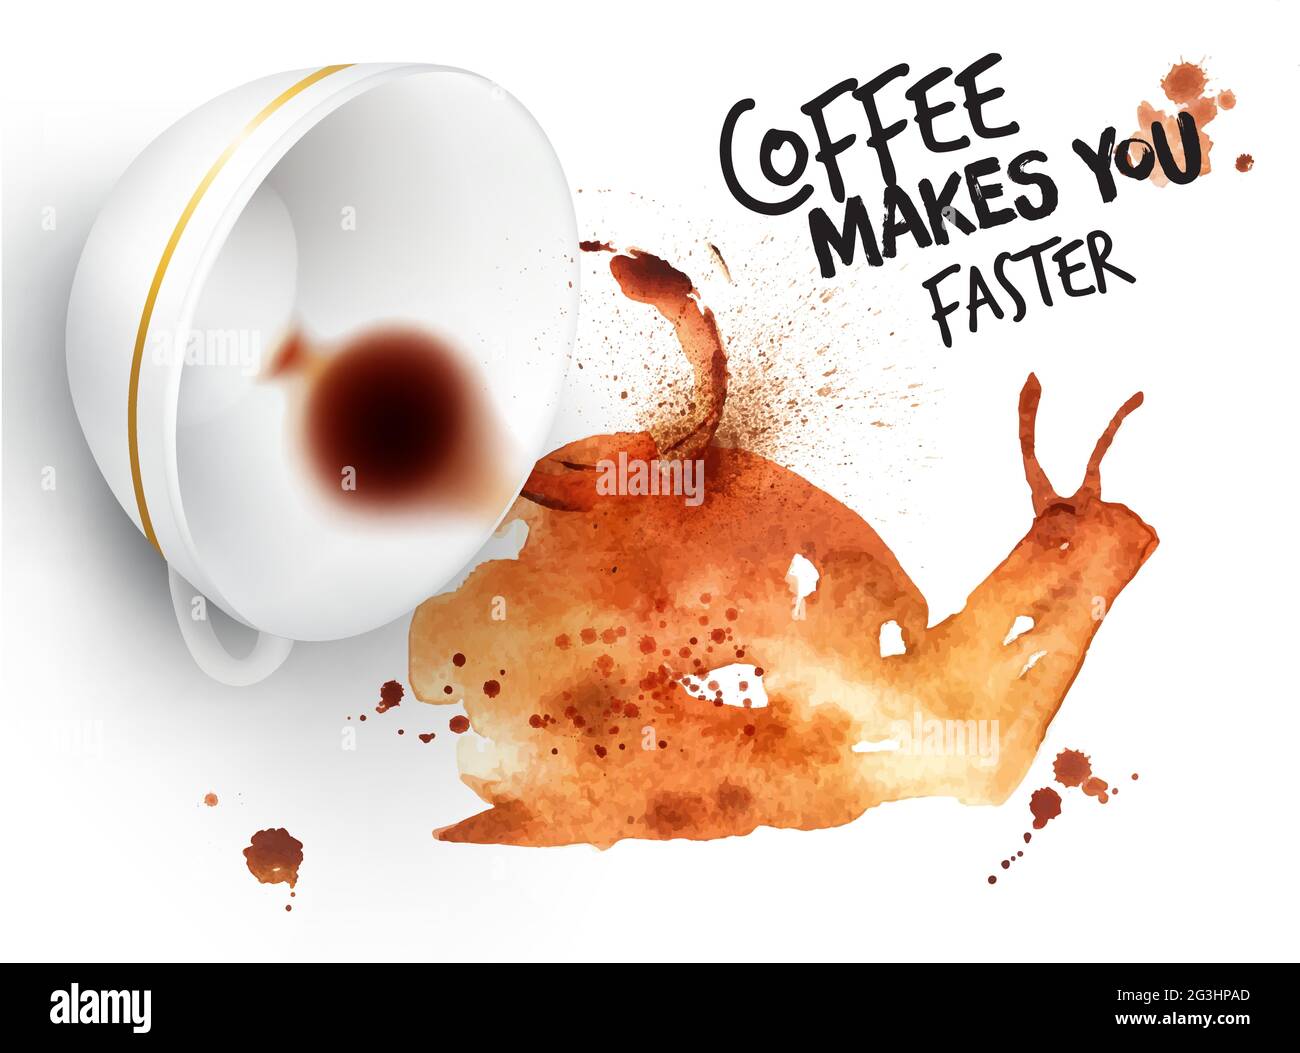 Poster drawn coffee imprint of snail and inverted cup with spilled coffee, lettering coffee makes you faster. Stock Vector